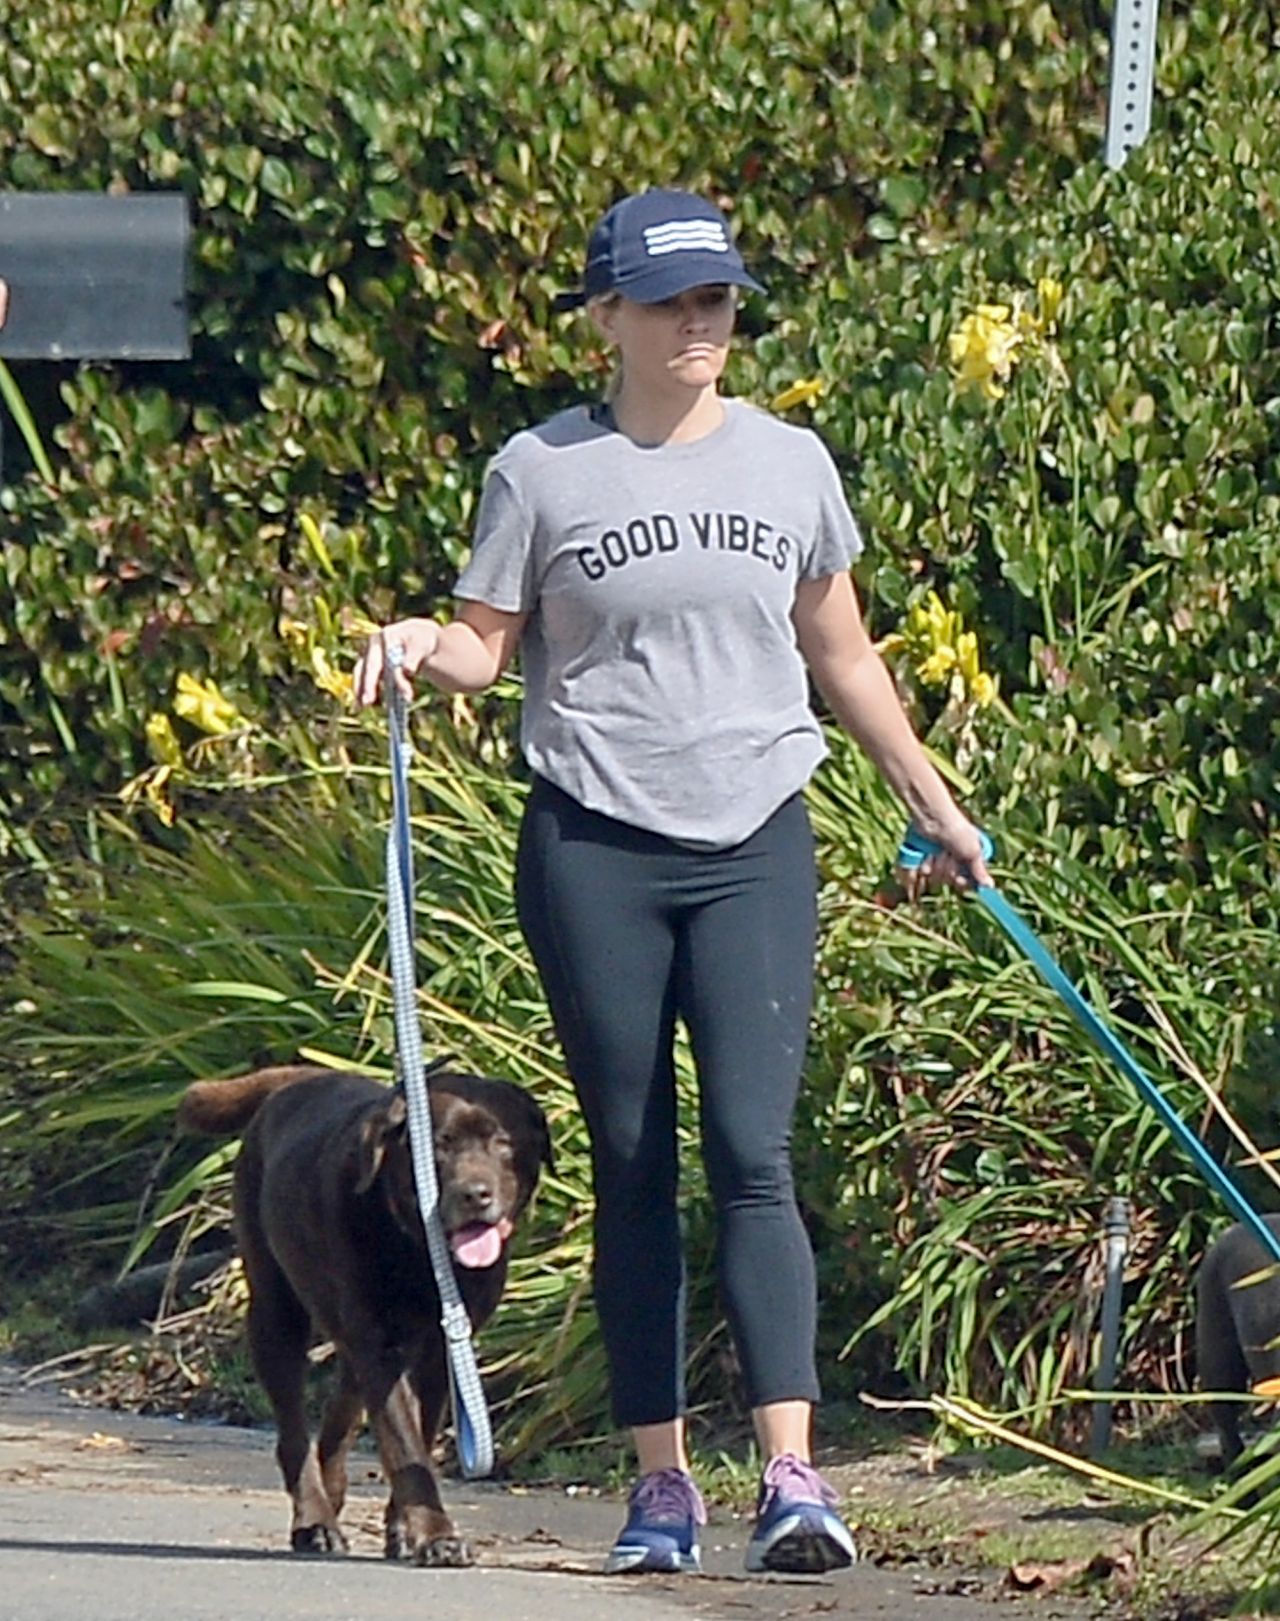 reese-witherspoon-taking-her-dogs-out-for-a-walk-10-29-2018-3.jpg